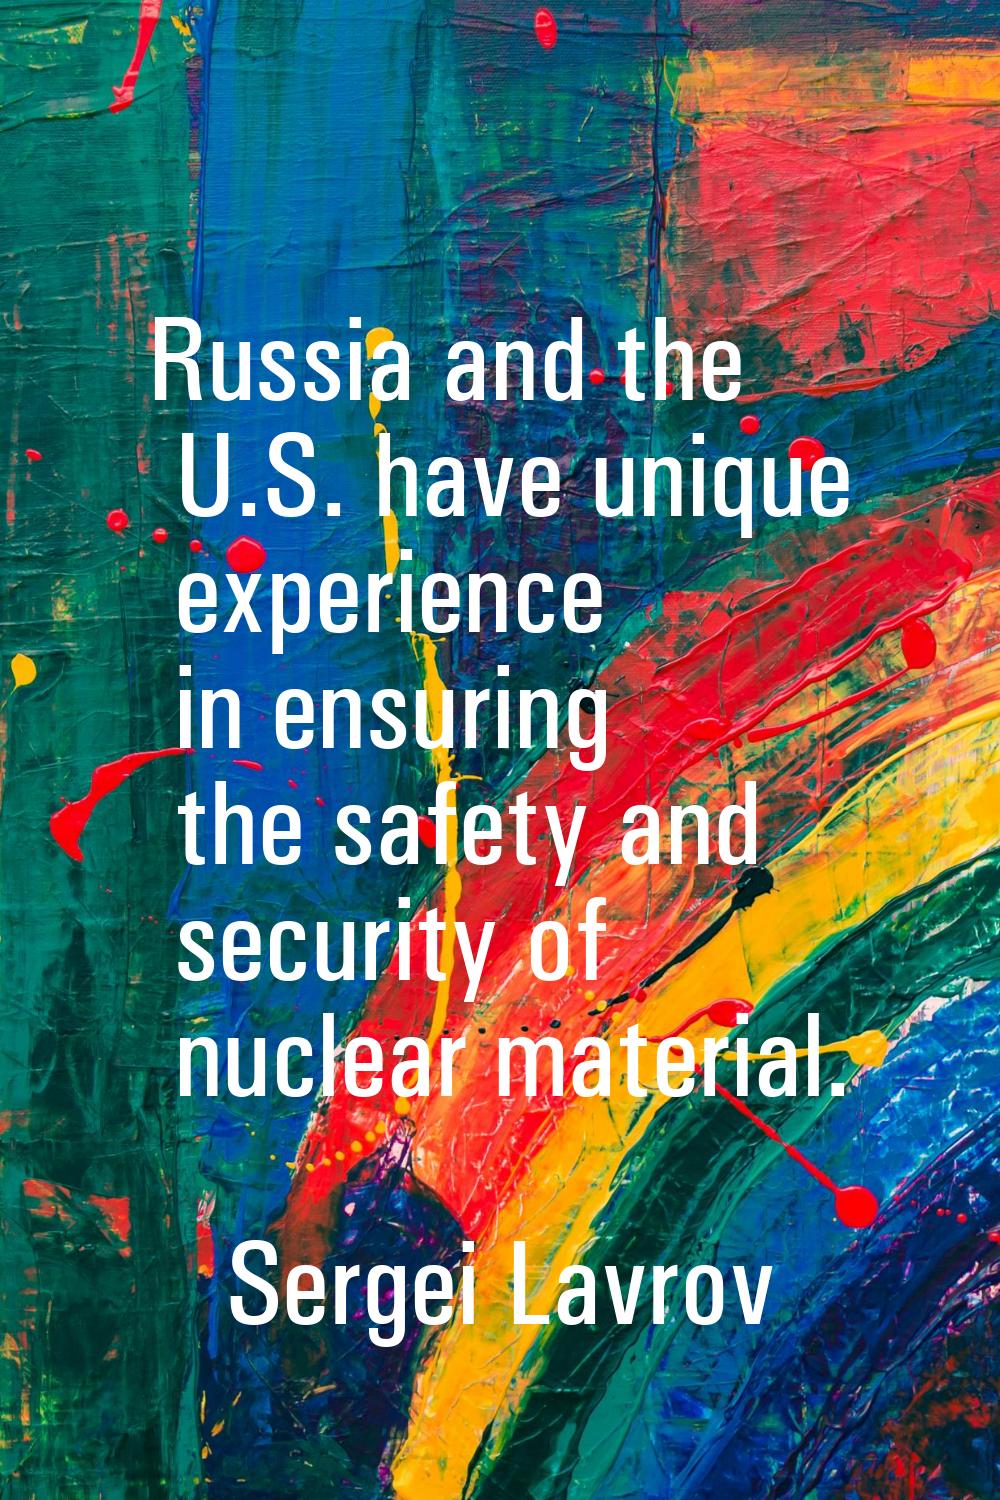 Russia and the U.S. have unique experience in ensuring the safety and security of nuclear material.